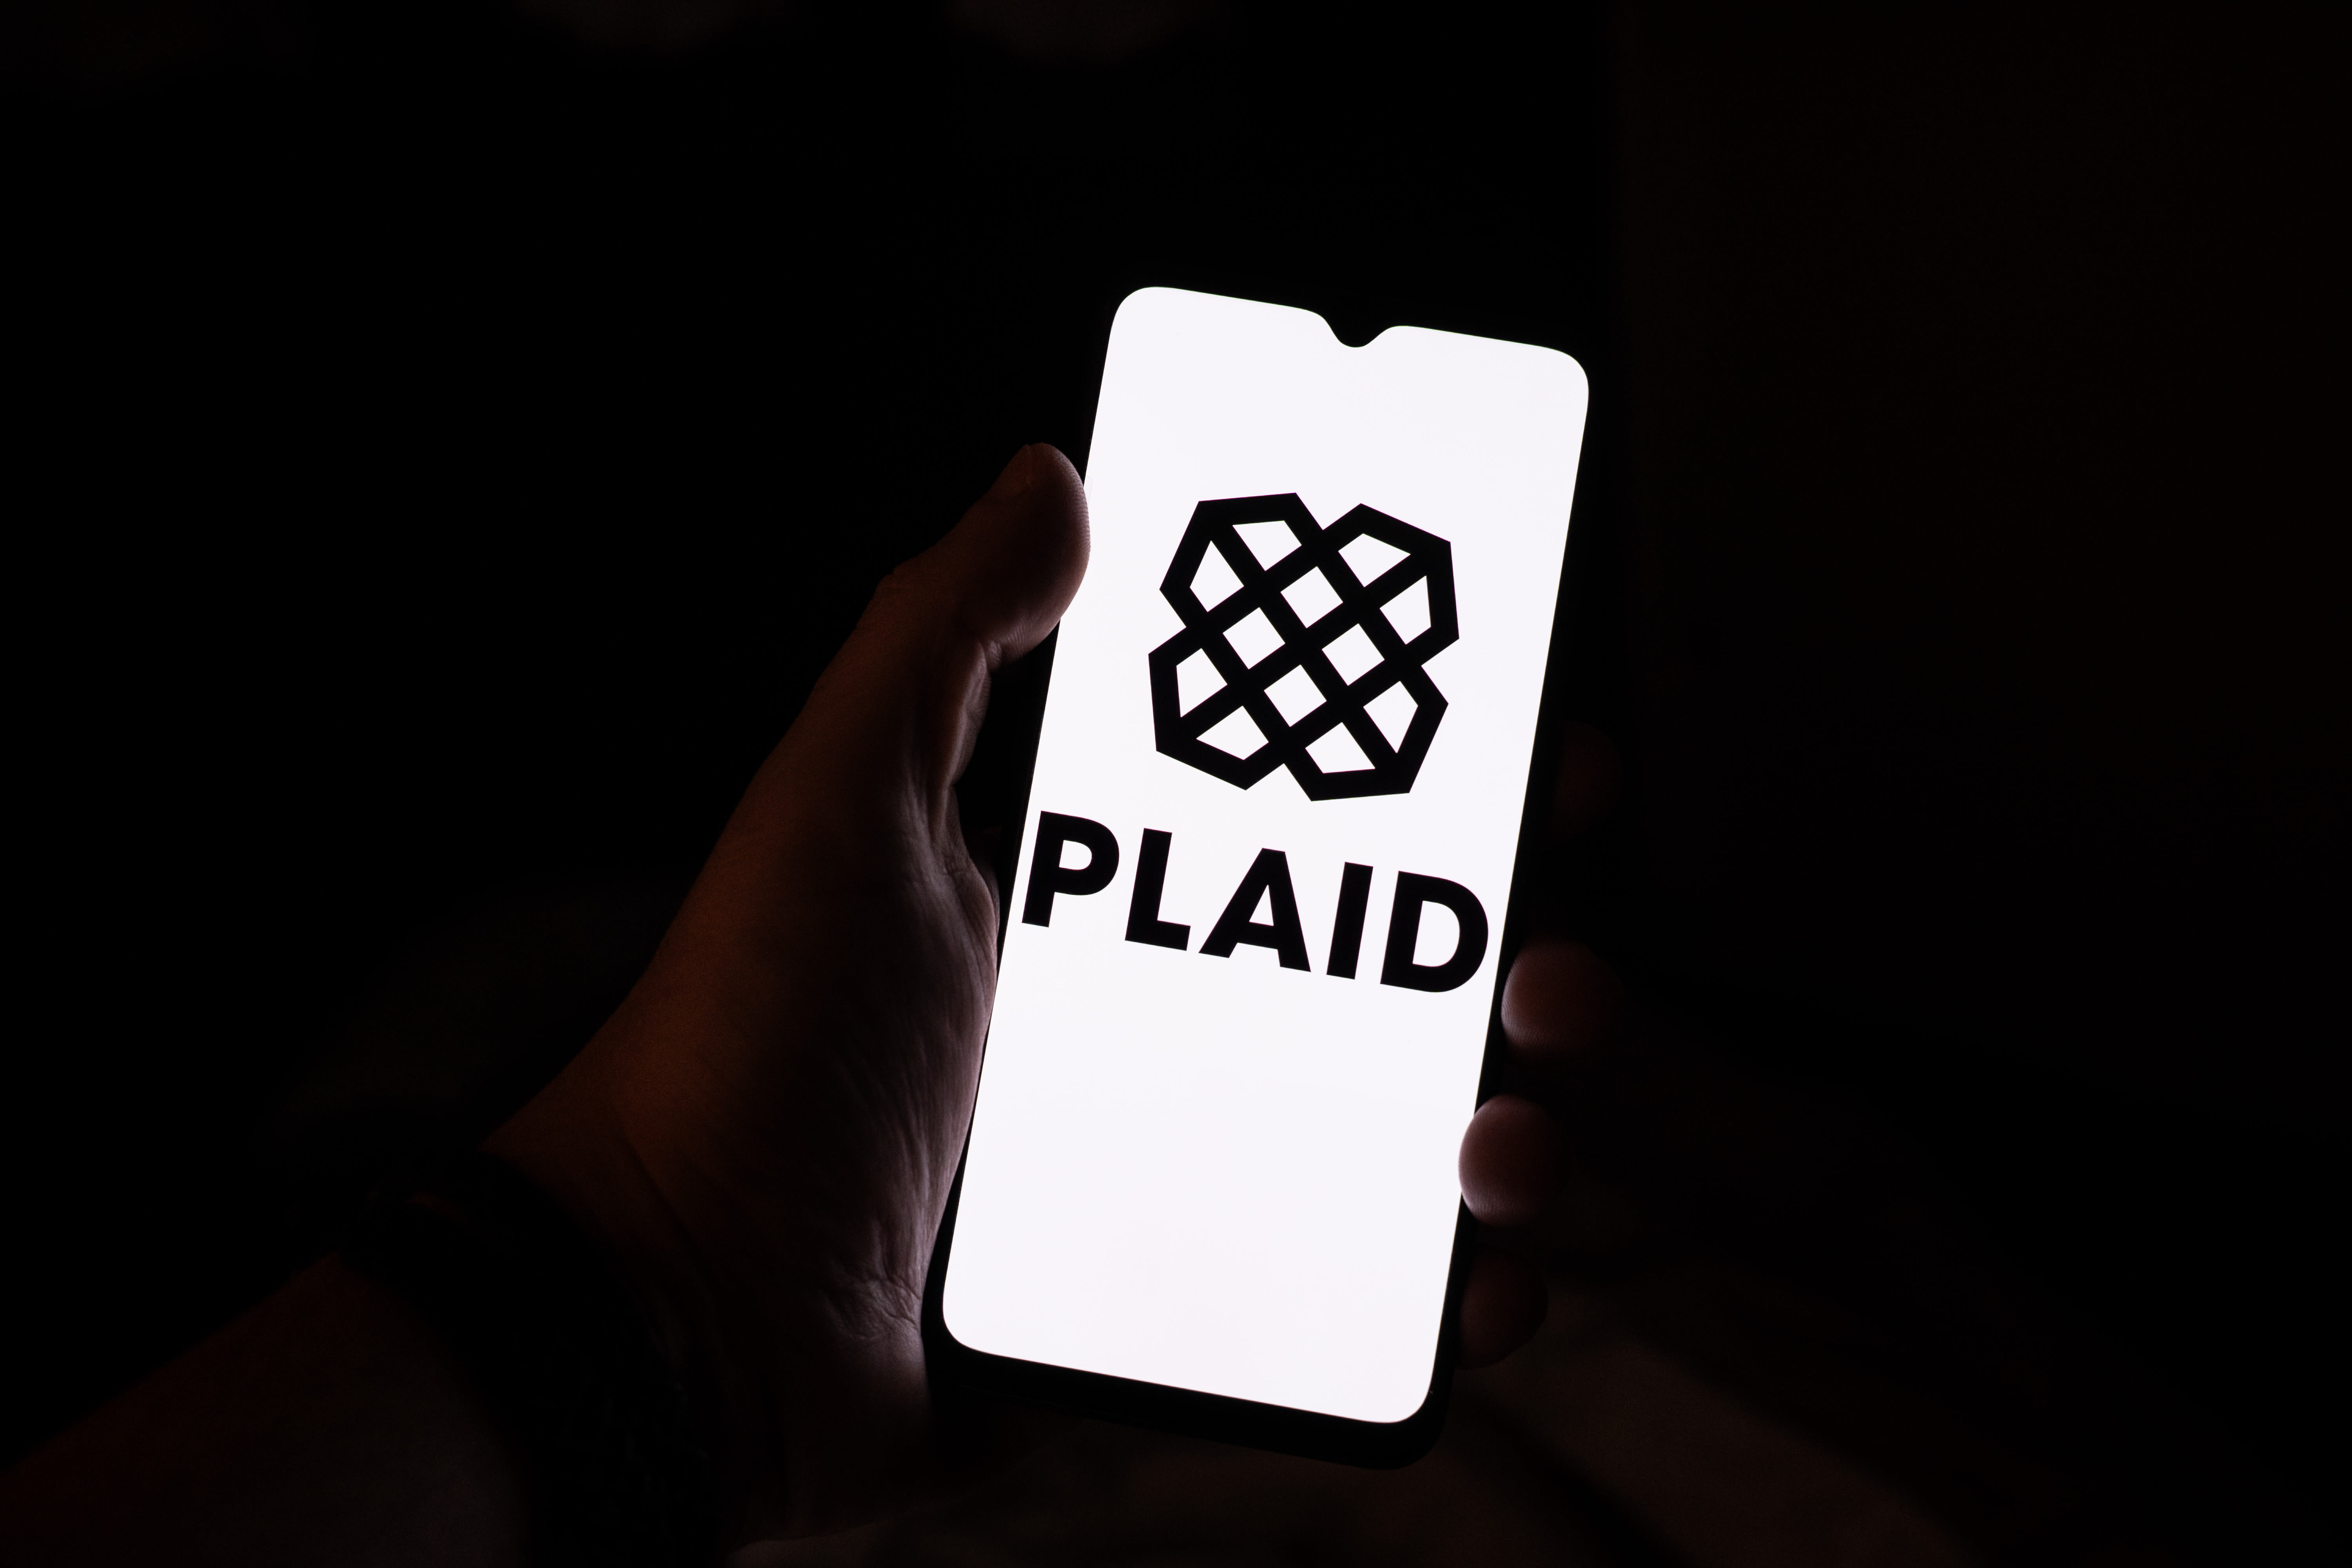 What is Plaid, and is it safe to use?